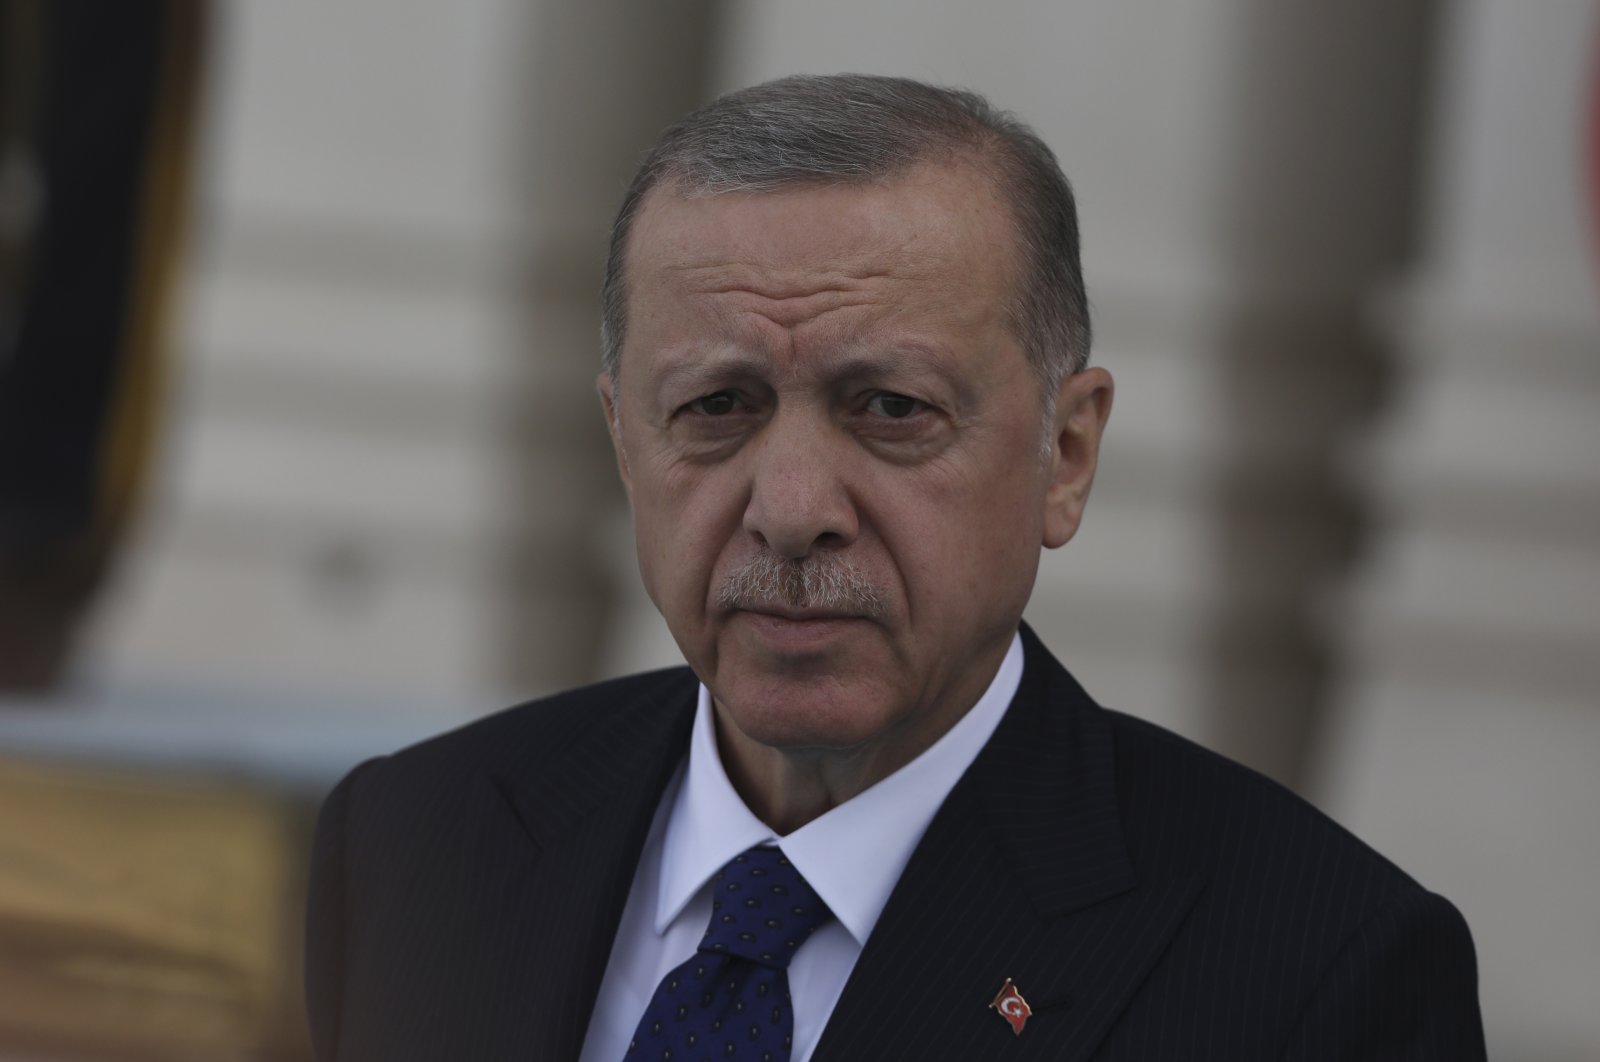 Erdoğan announces 2023 presidential candidacy for People’s Alliance